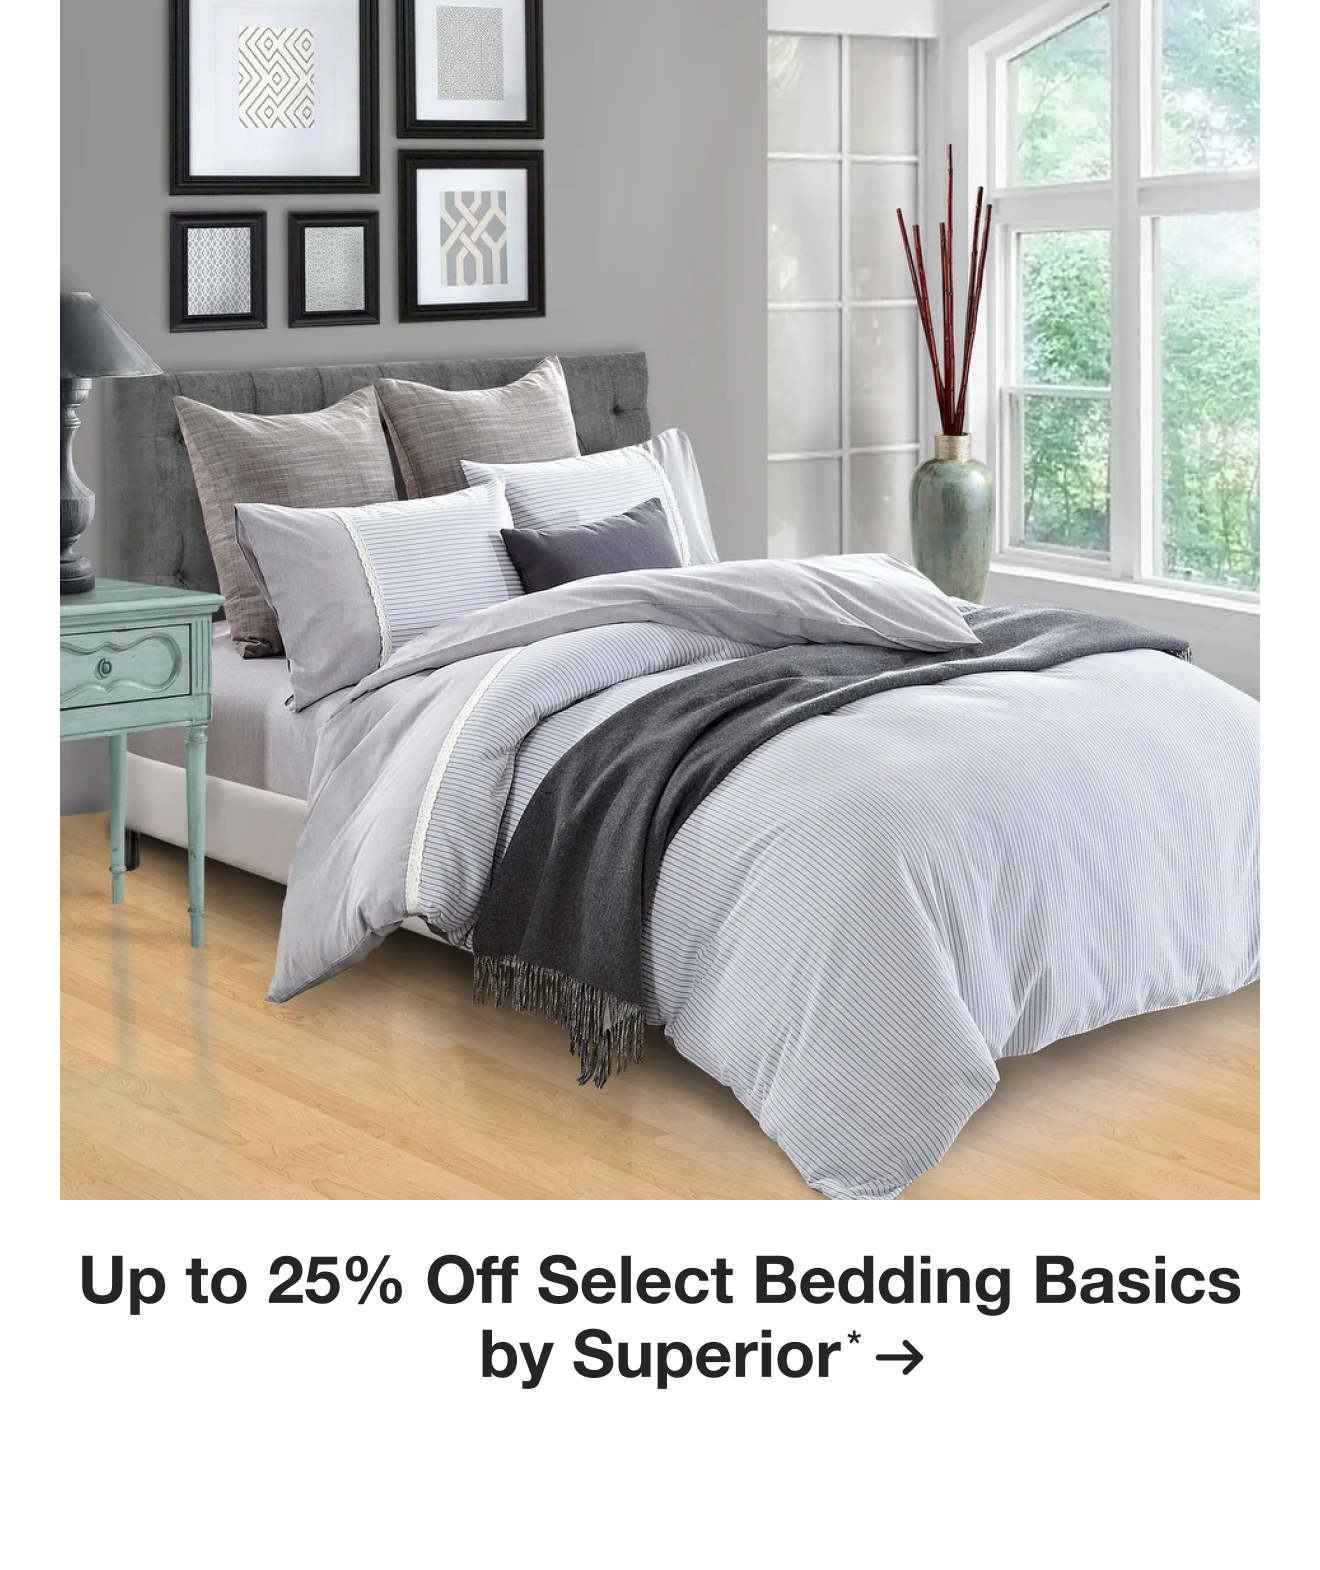 Up to 25% Off Select Bedding Basics by Superior*